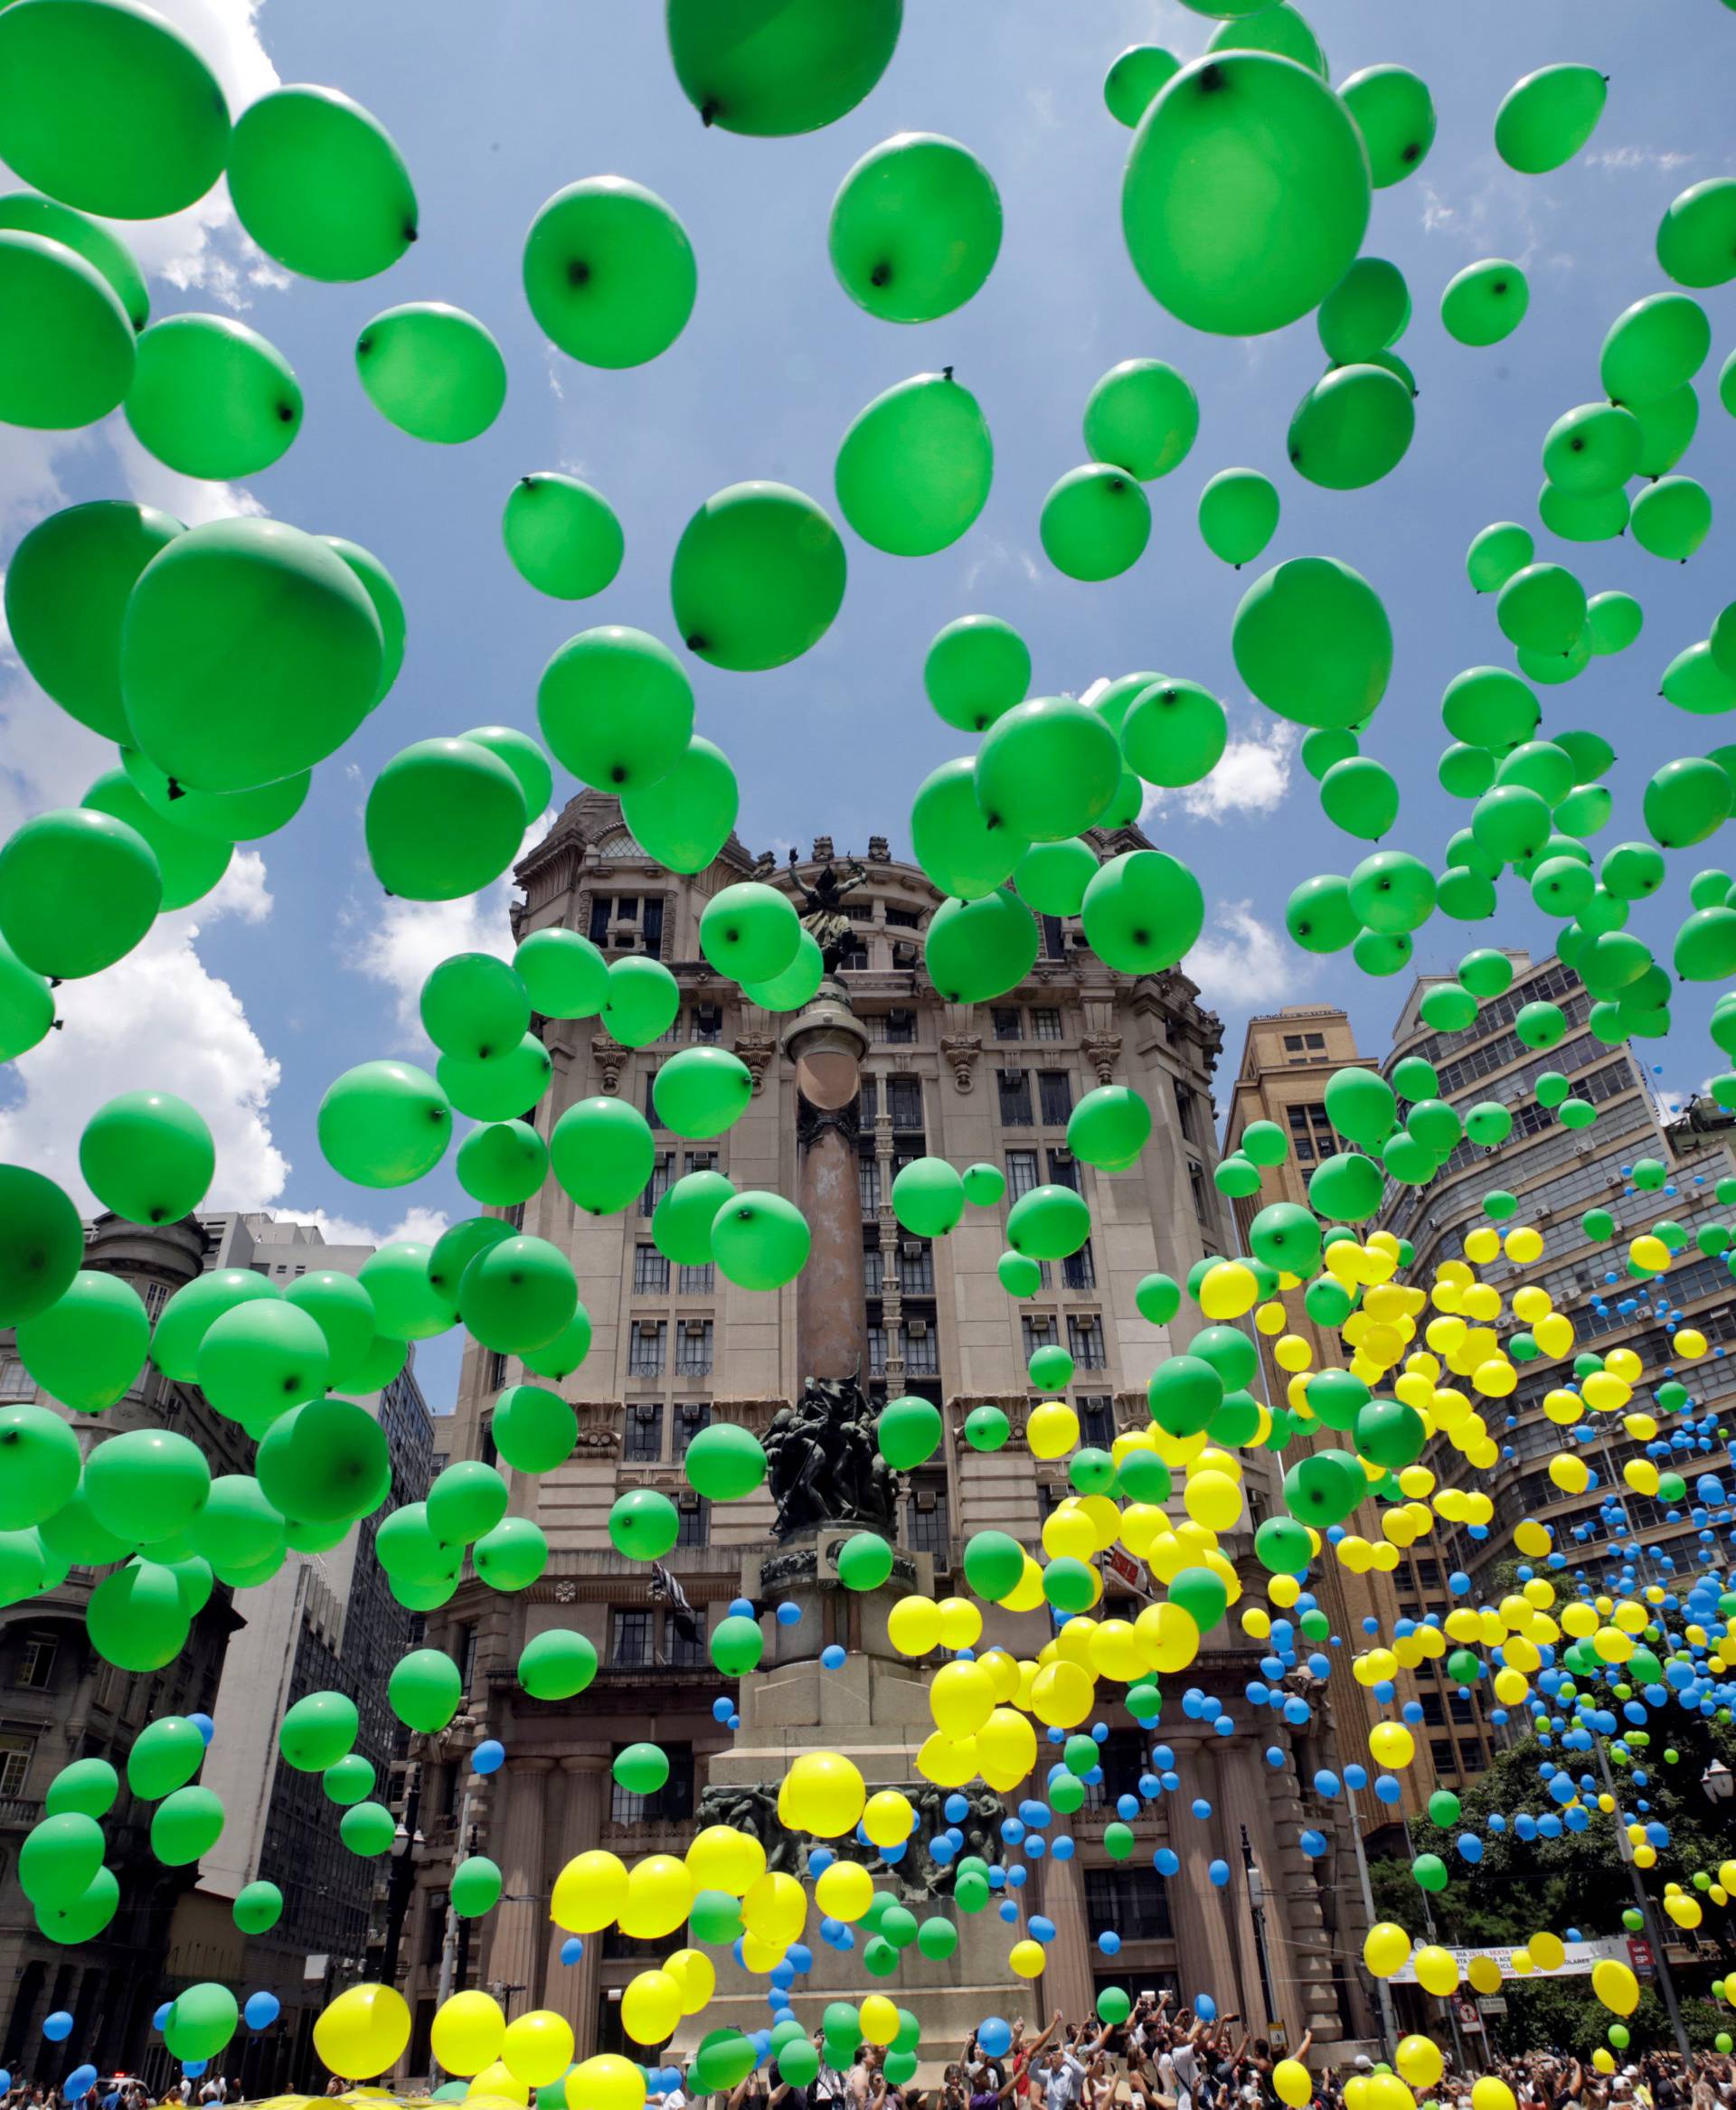 Balloons are released in the sky of downtown Sao Paulo as part of year-end celebrations, Sao Paulo